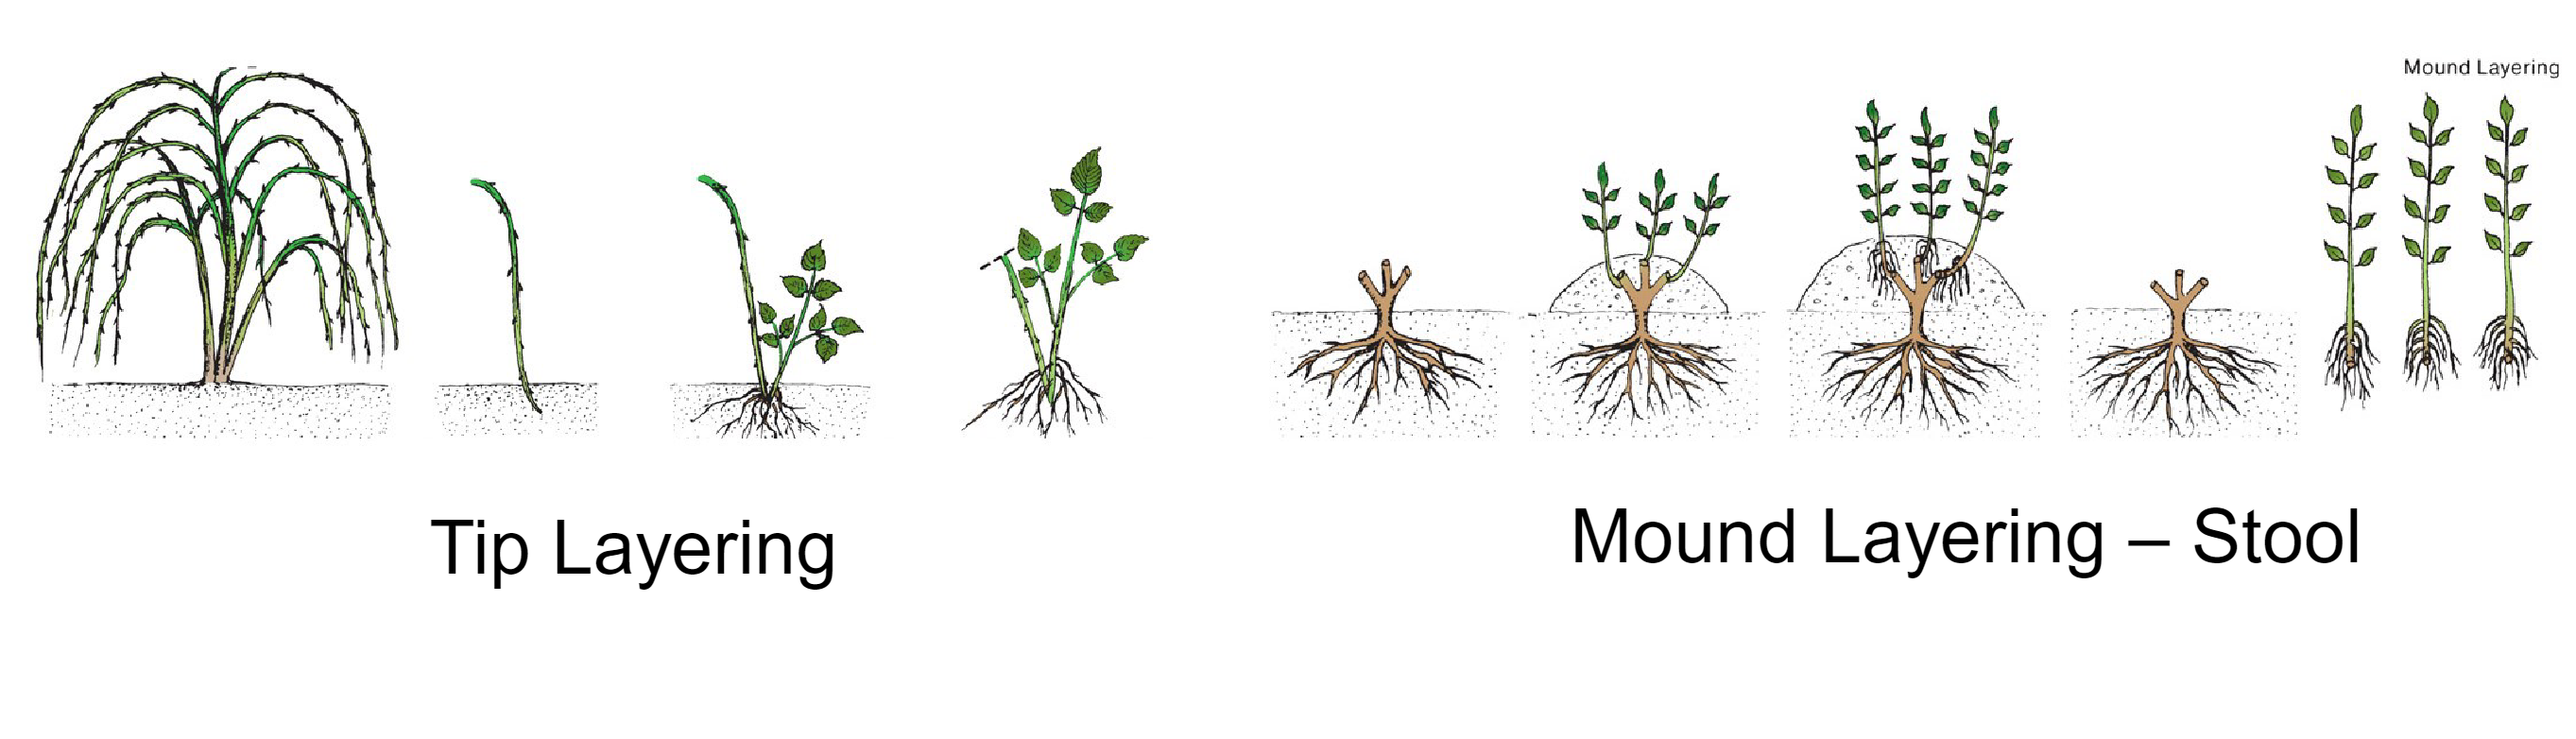 <p><span style="font-family: sans-serif">Propagation technique where roots are formed prior to the stem being removed from the parent plant. also can be done with air layering. must form adventitious roots. </span></p>